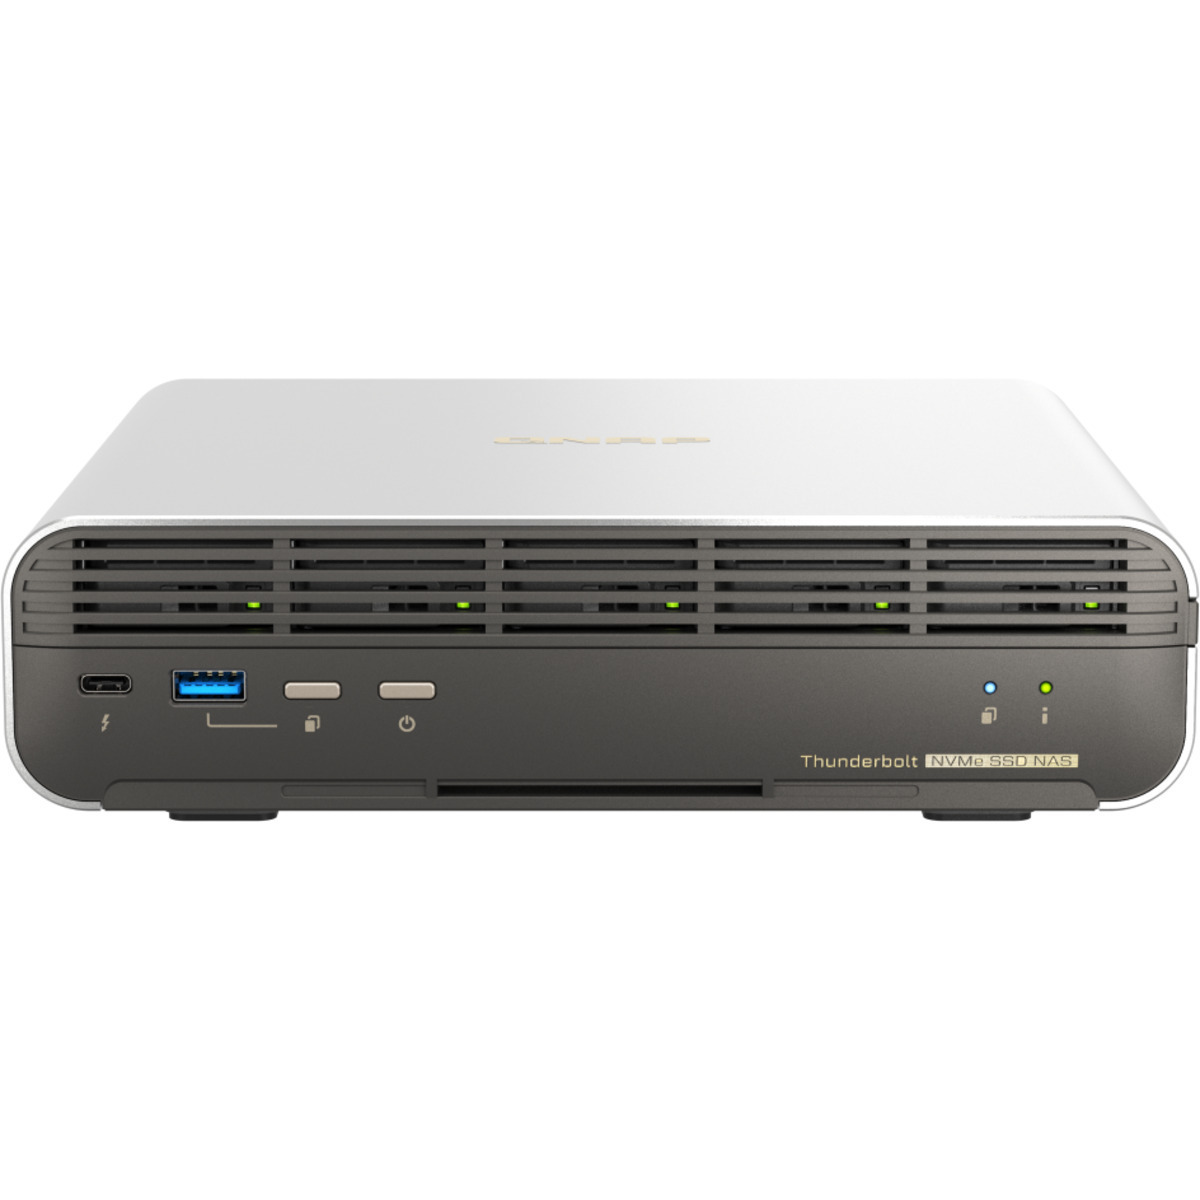 QNAP TBS-h574TX Core i3 Thunderbolt 4 6tb 5-Bay Desktop Multimedia / Power User / Business DAS-NAS - Combo Direct + Network Storage Device 3x2tb Sandisk Plus Series SDSSDA3N-2T00  3200/3000MB/s M.2 2280 NVMe SSD CONSUMER Class Drives Installed - Burn-In Tested TBS-h574TX Core i3 Thunderbolt 4